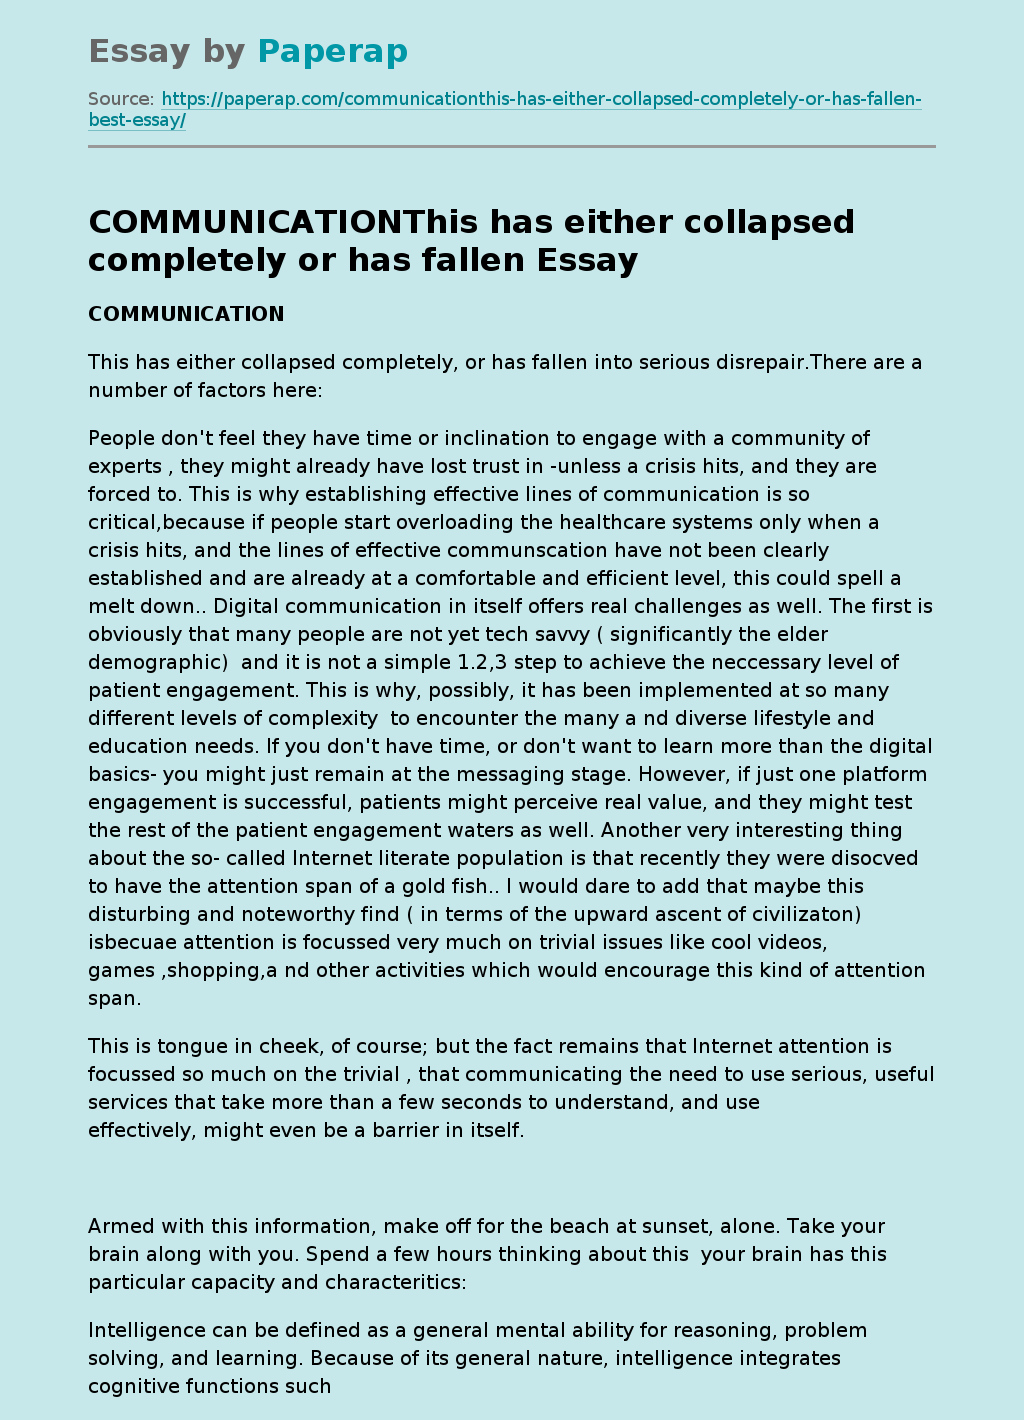 COMMUNICATIONThis has either collapsed completely or has fallen